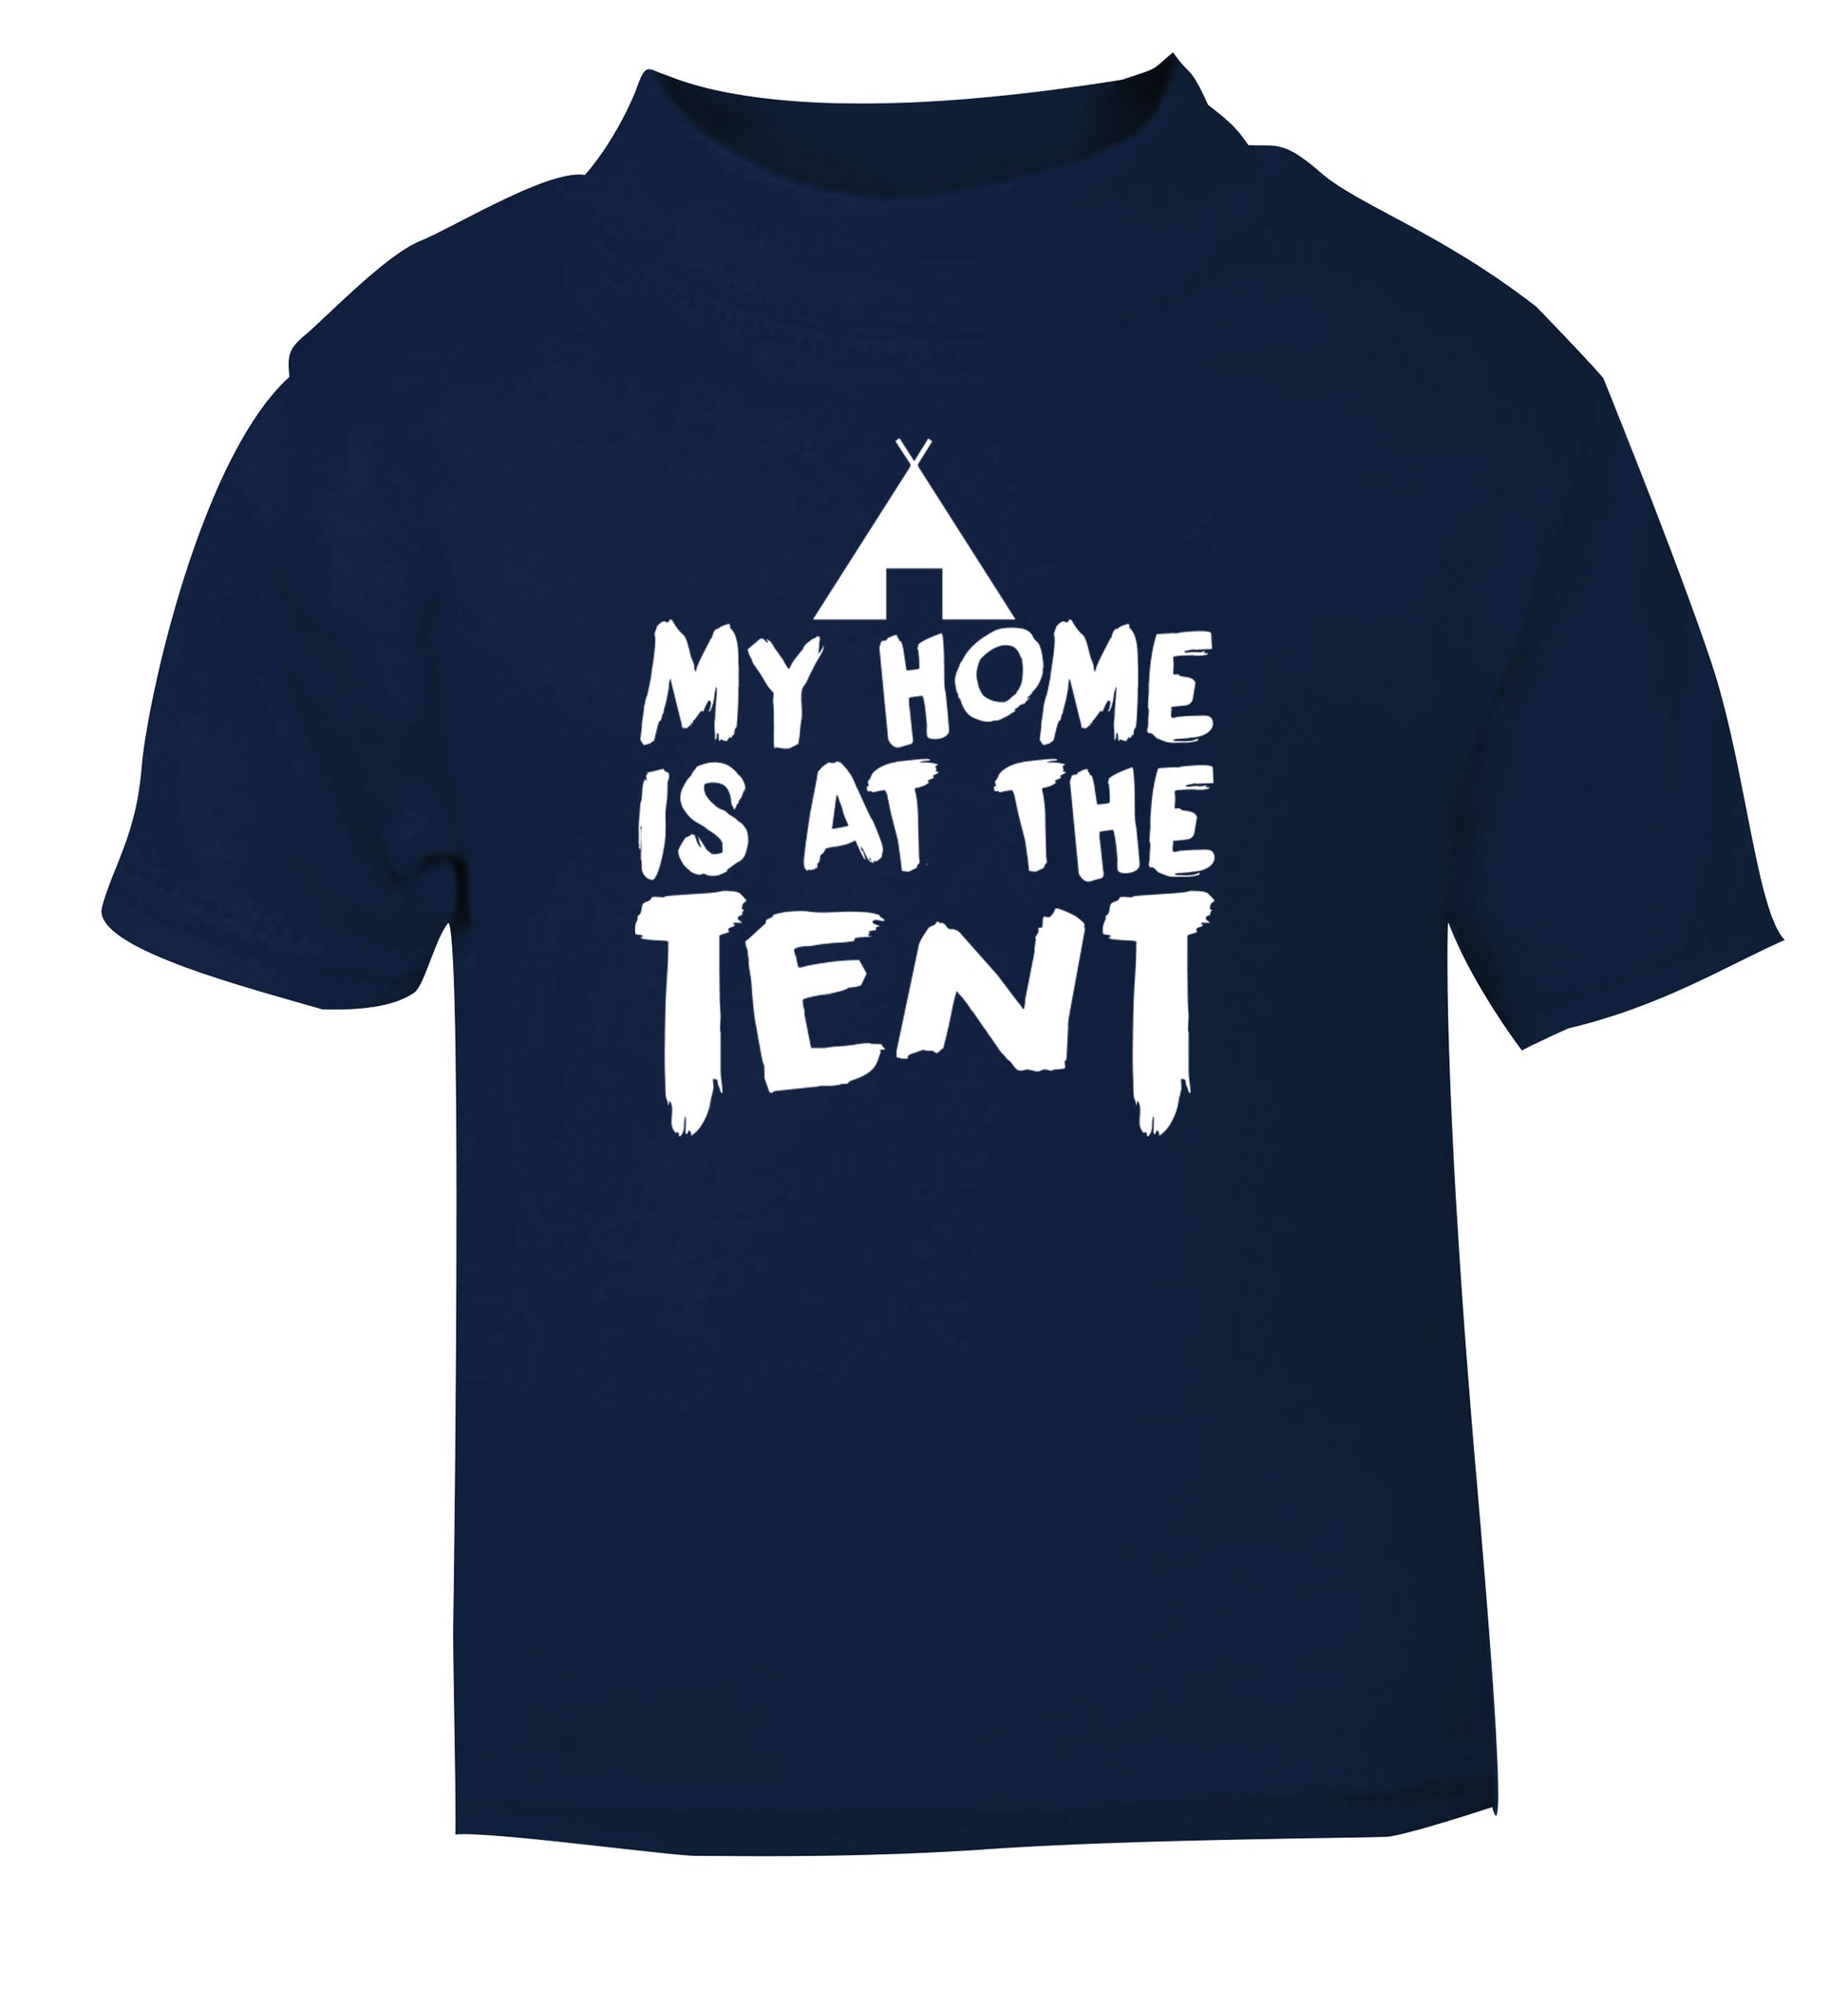 My home is at the tent navy Baby Toddler Tshirt 2 Years